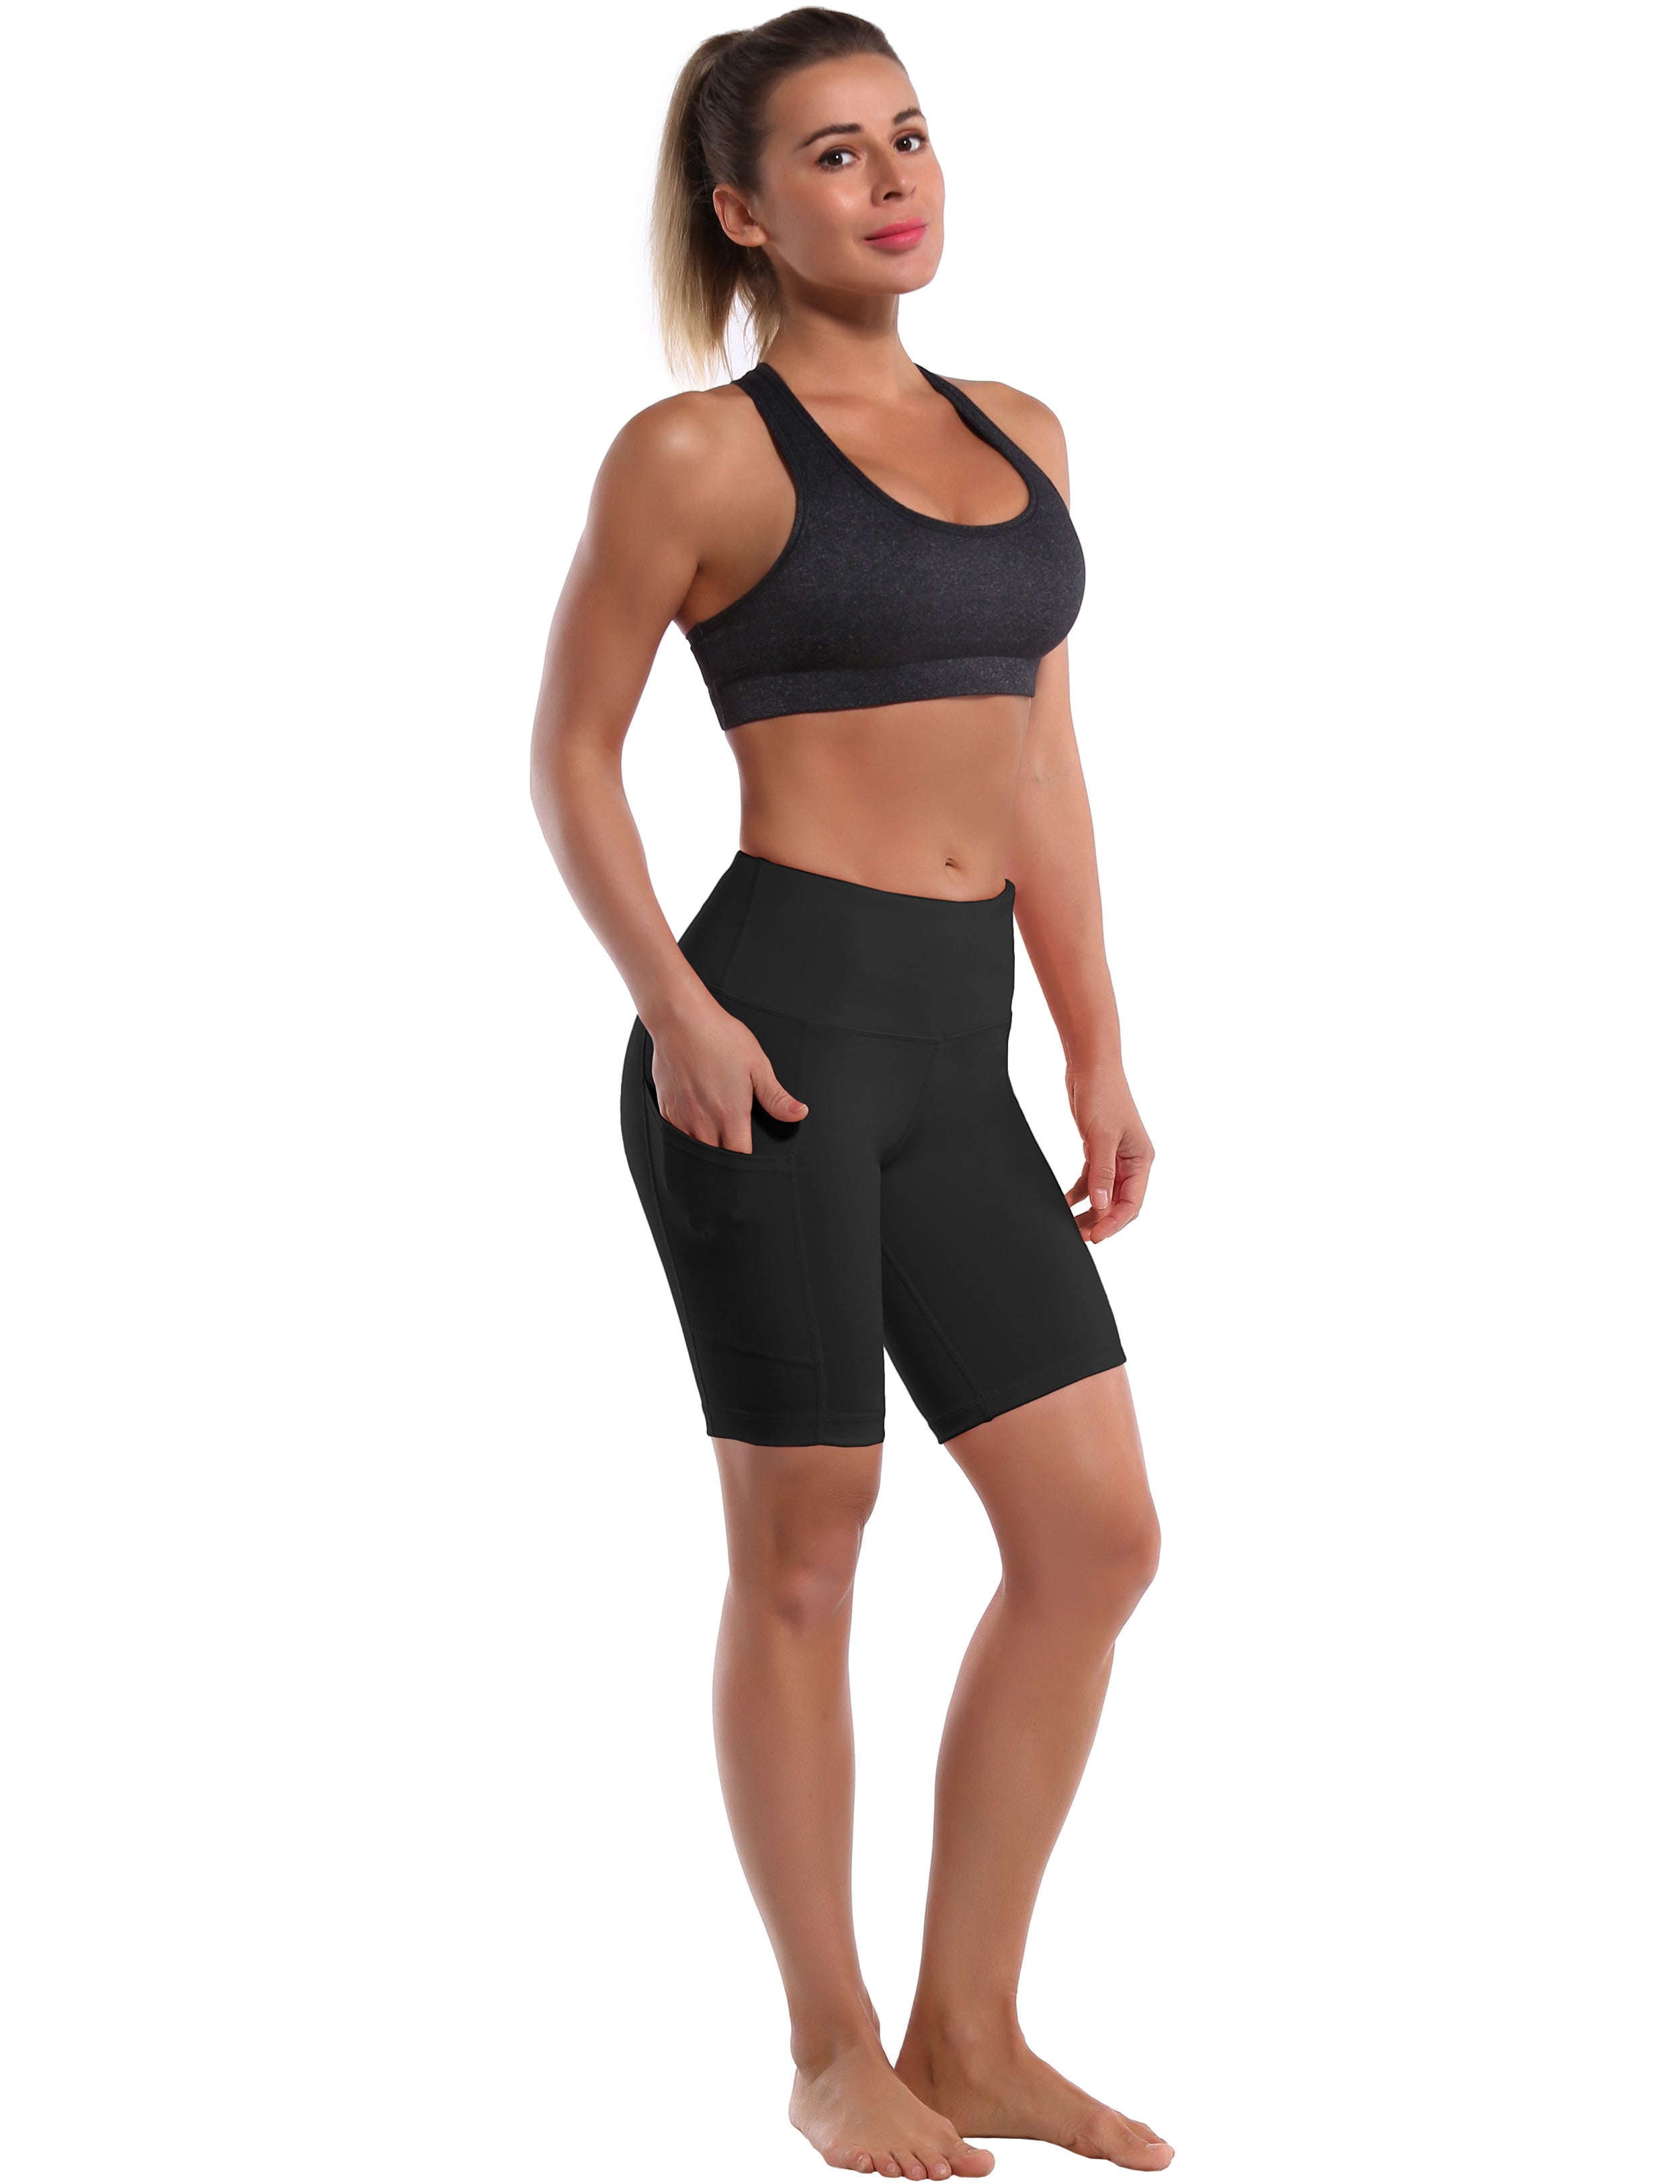 8" Side Pockets Yoga Shorts black Sleek, soft, smooth and totally comfortable: our newest style is here. Softest-ever fabric High elasticity High density 4-way stretch Fabric doesn't attract lint easily No see-through Moisture-wicking Machine wash 75% Nylon, 25% Spandex